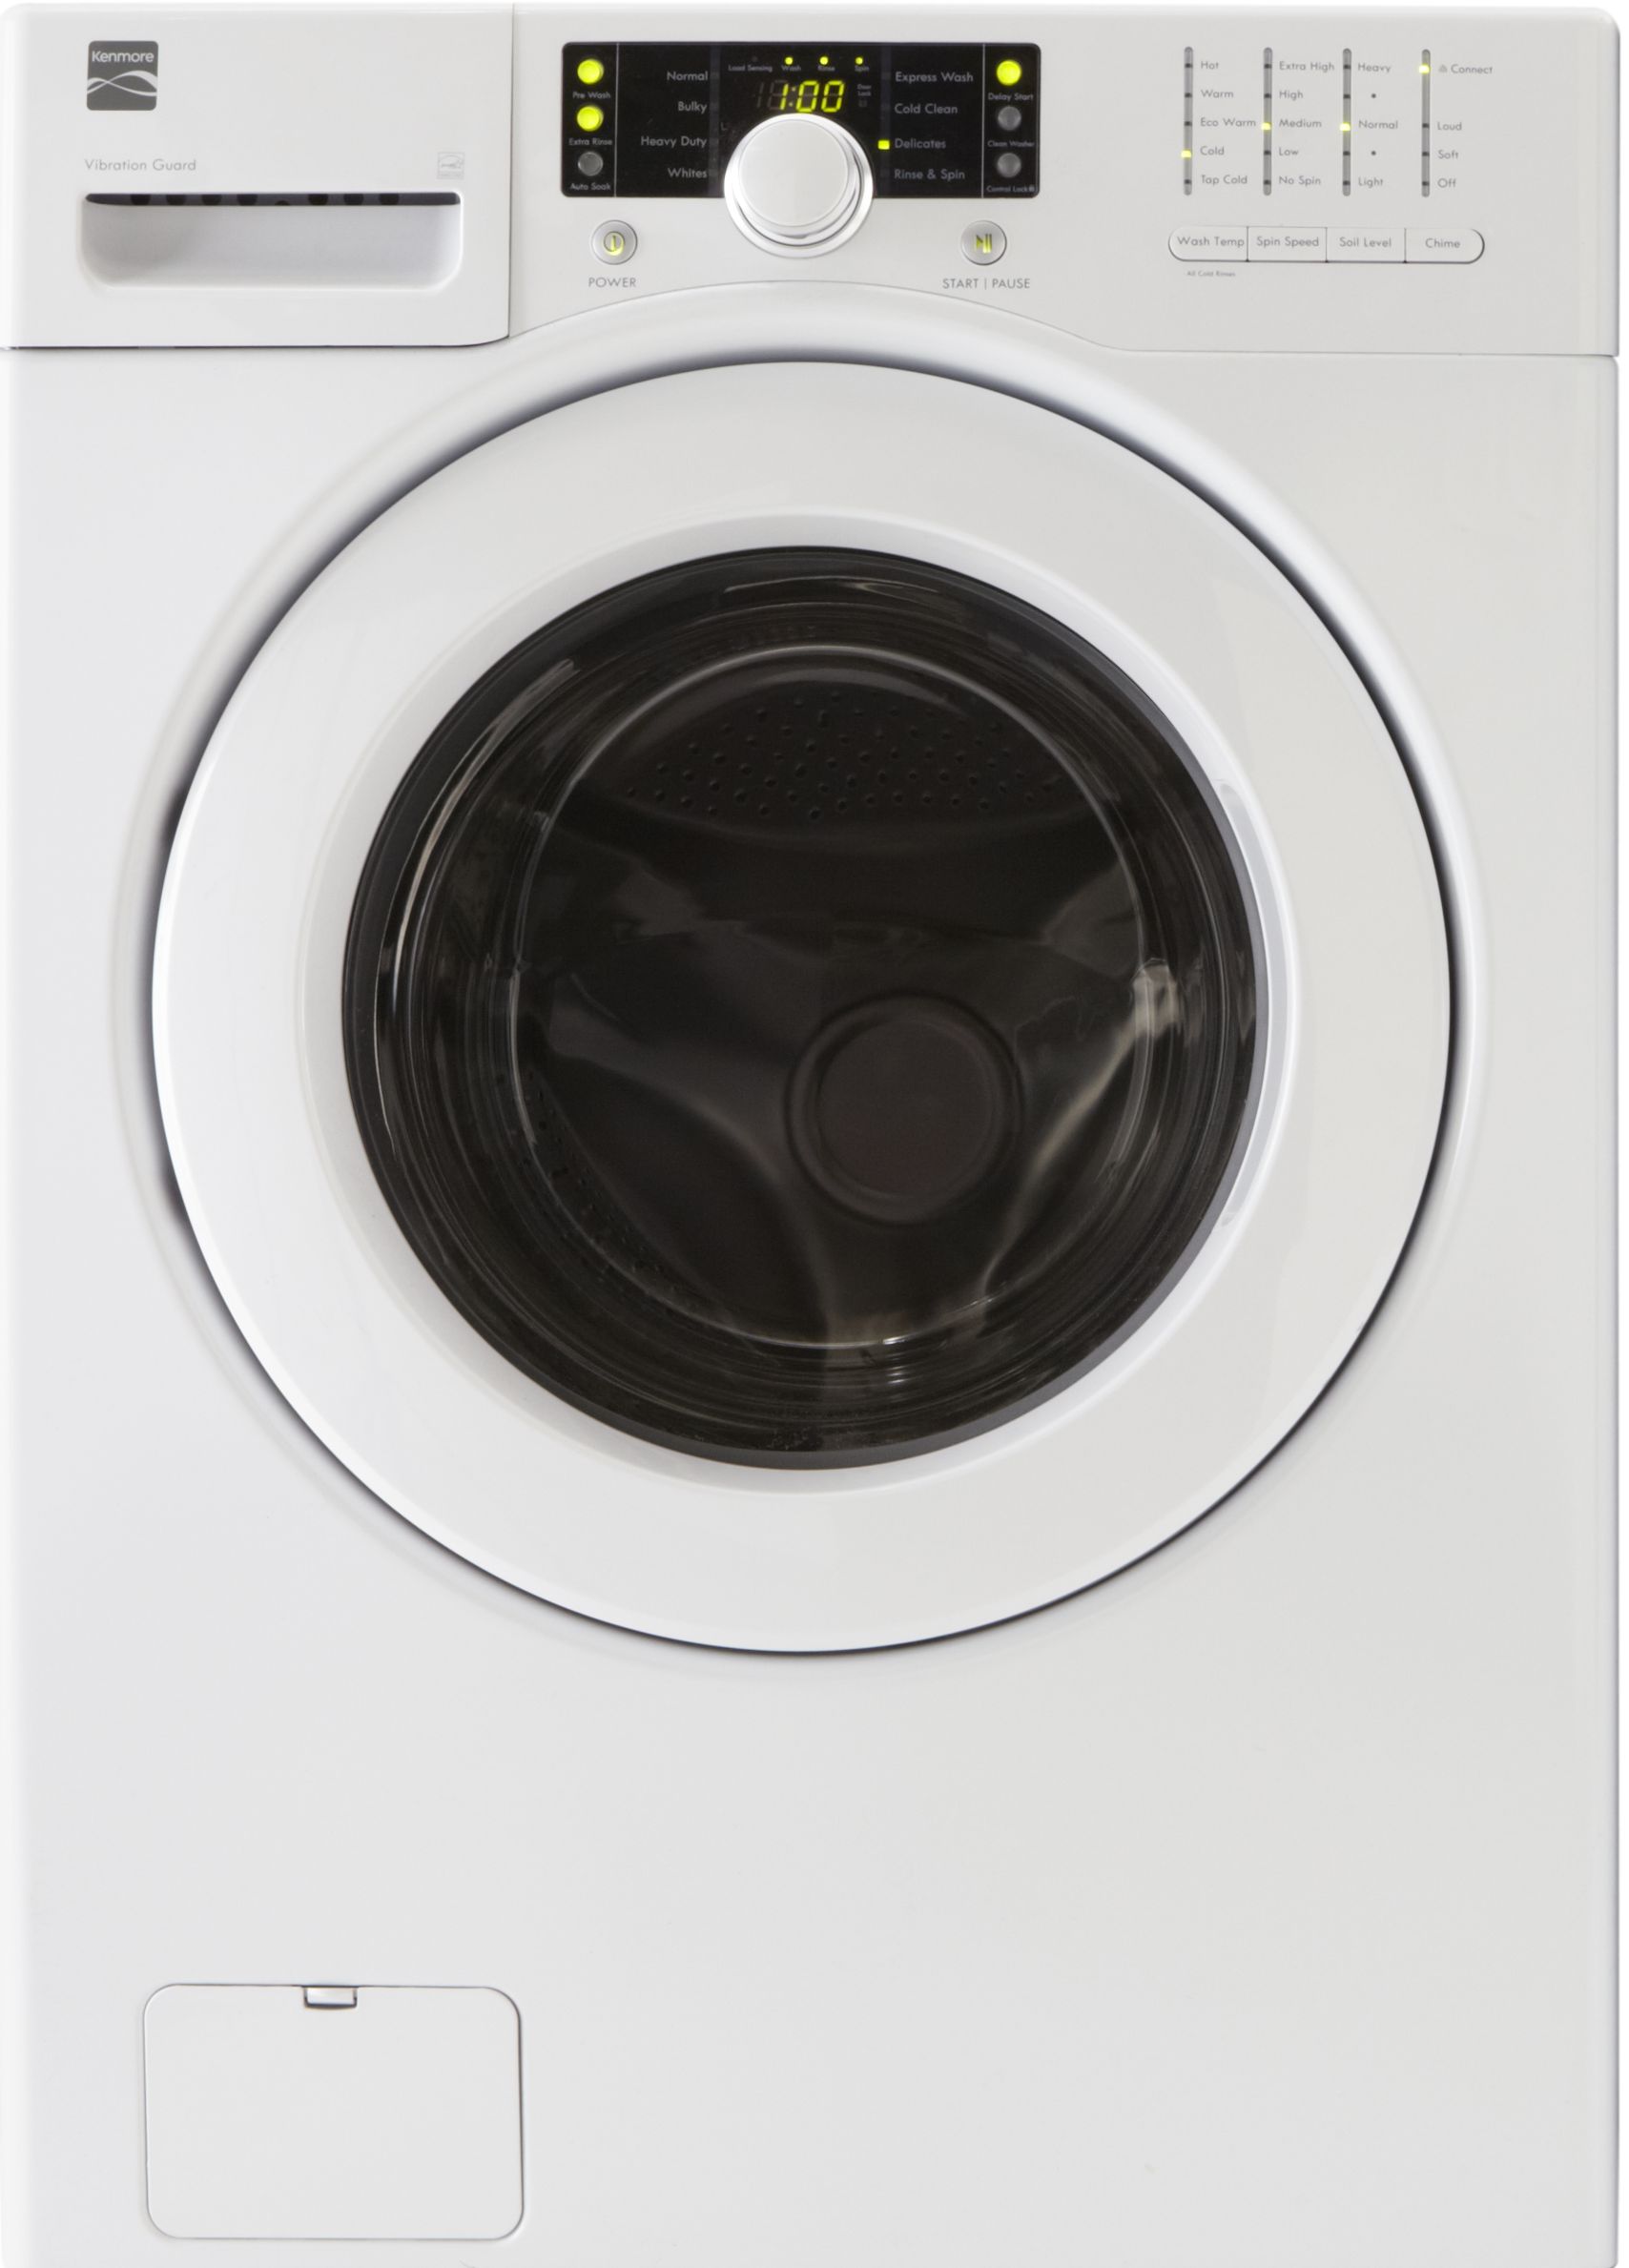 Kenmore 3.6 cu. ft. Front-Load Washer - White